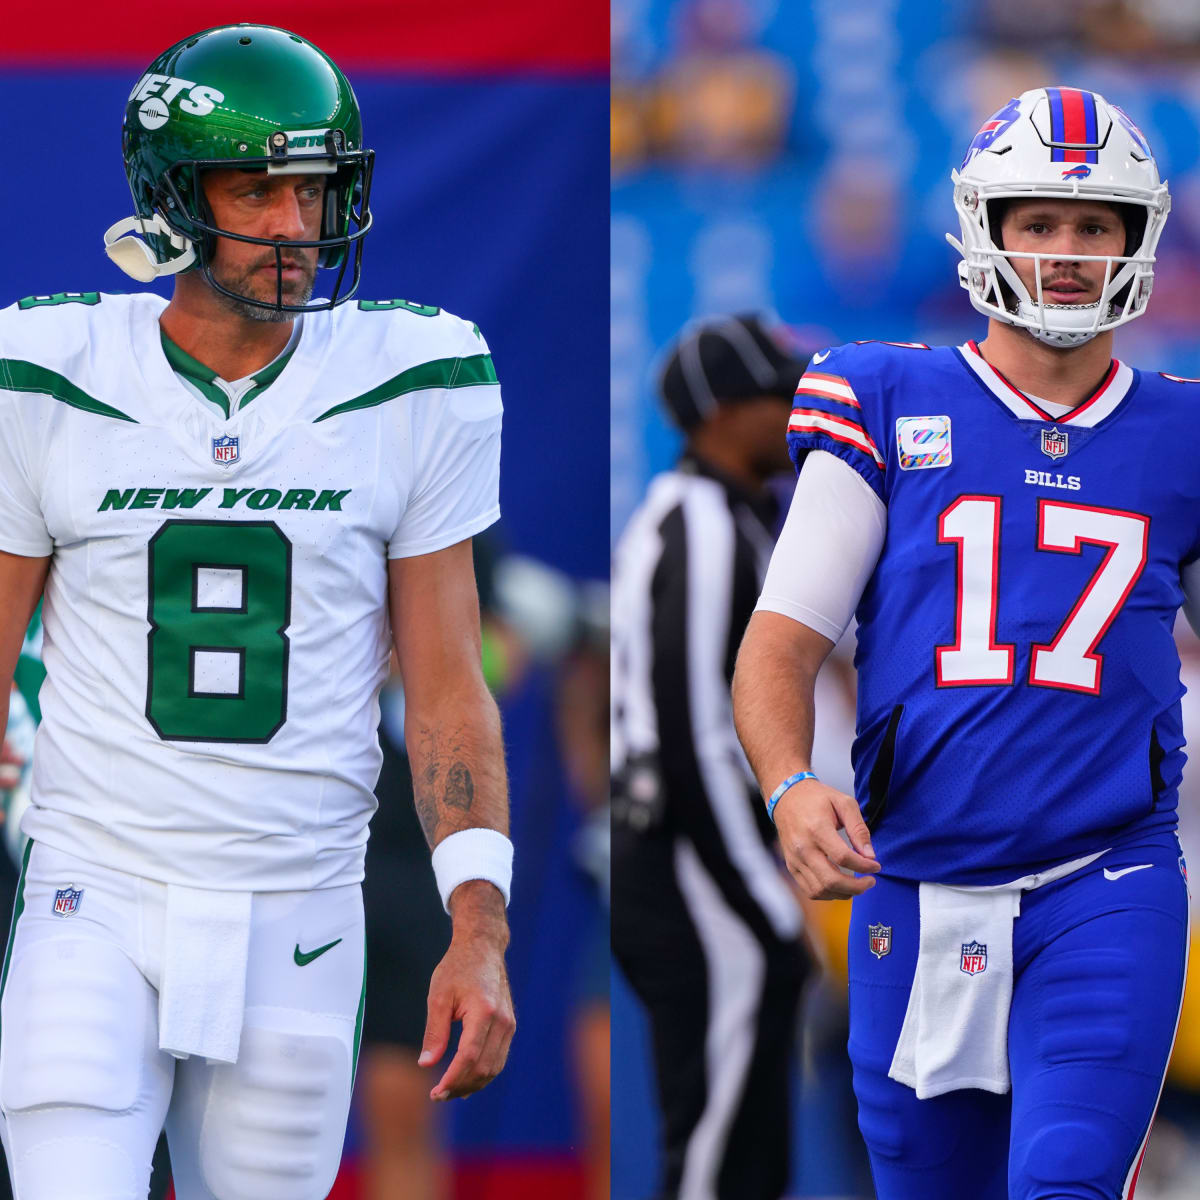 Buffalo Bills vs New York Jets. Pressure is on Jets & Aaron Rodgers,  injuries & game predictions